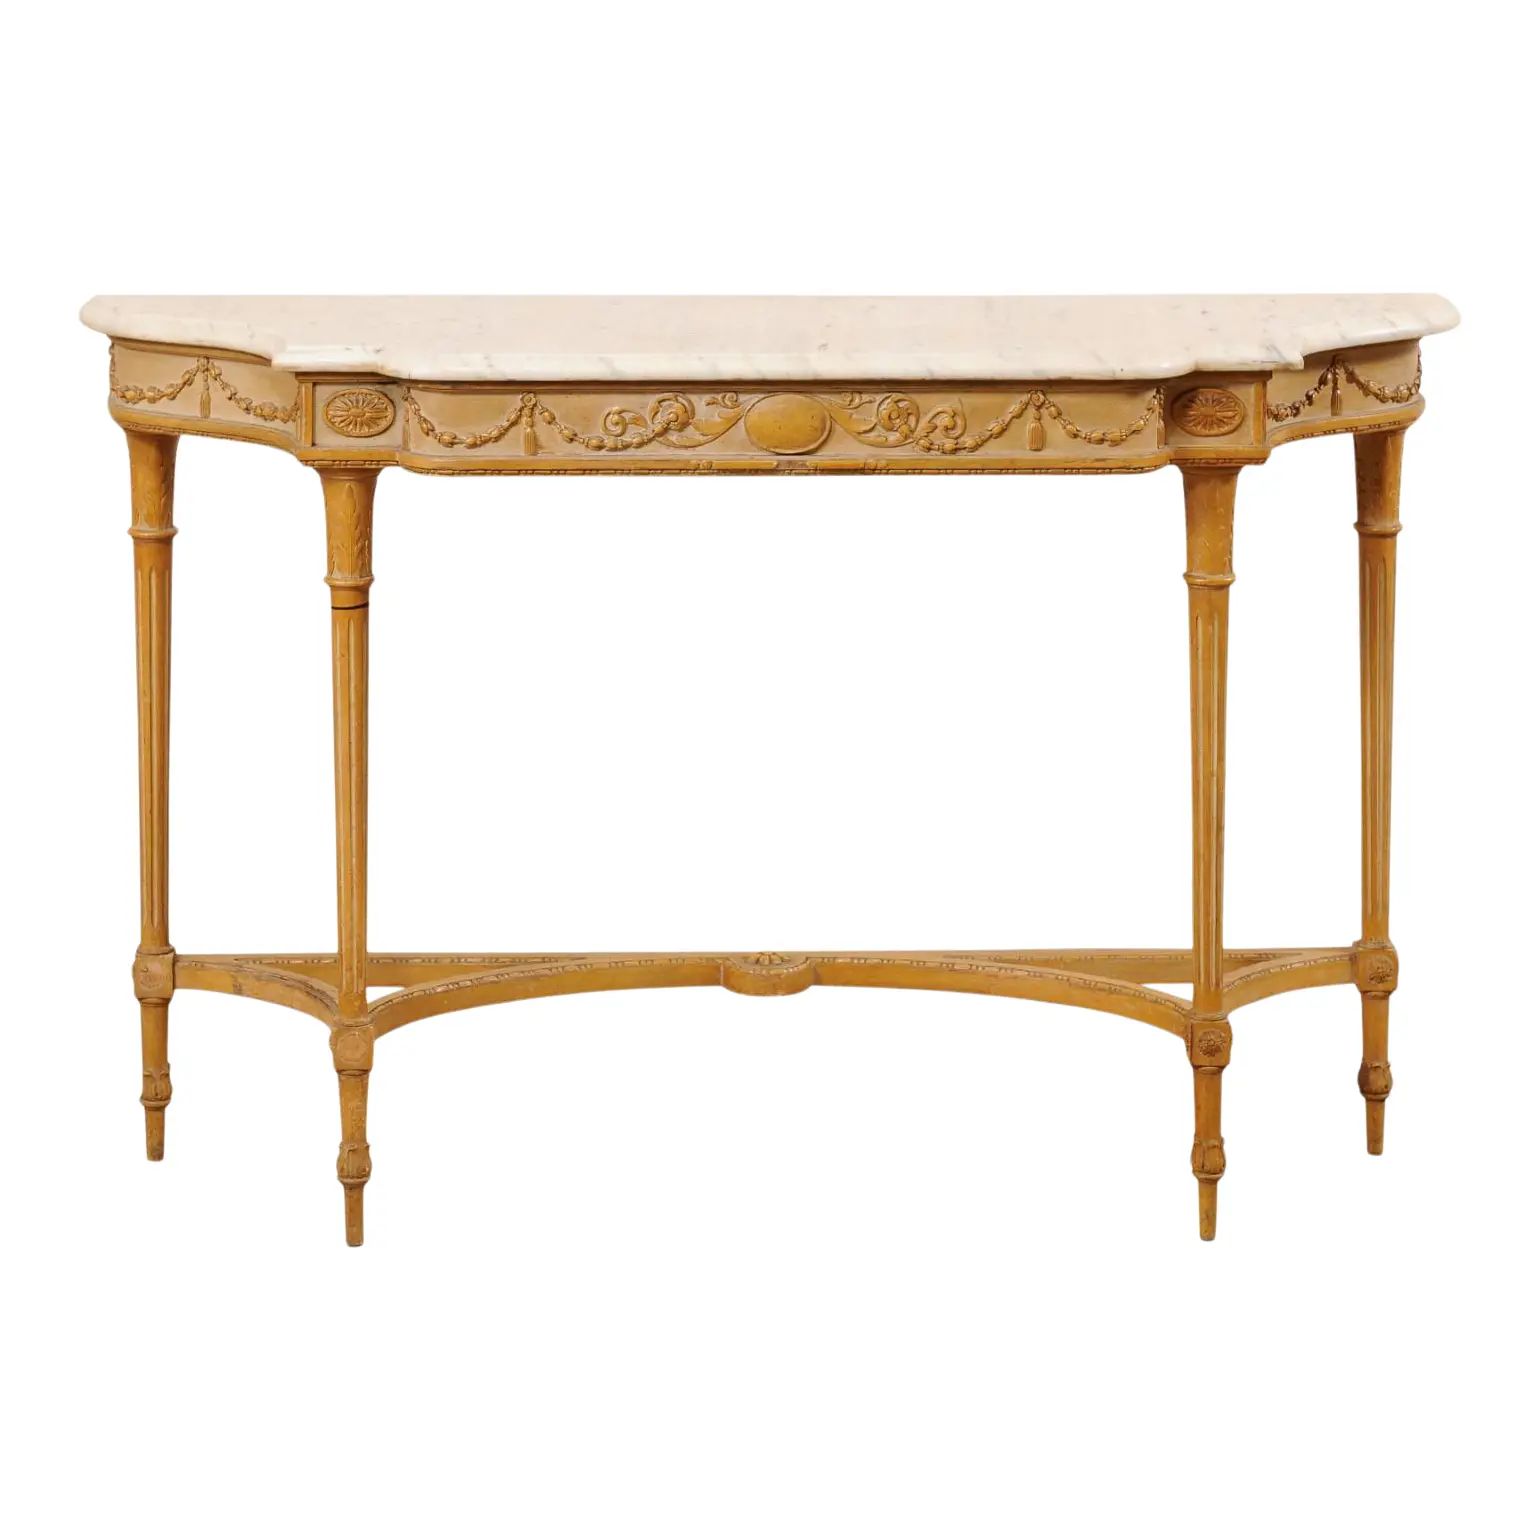 French Neoclassical Style Marble Top Console Table | Chairish